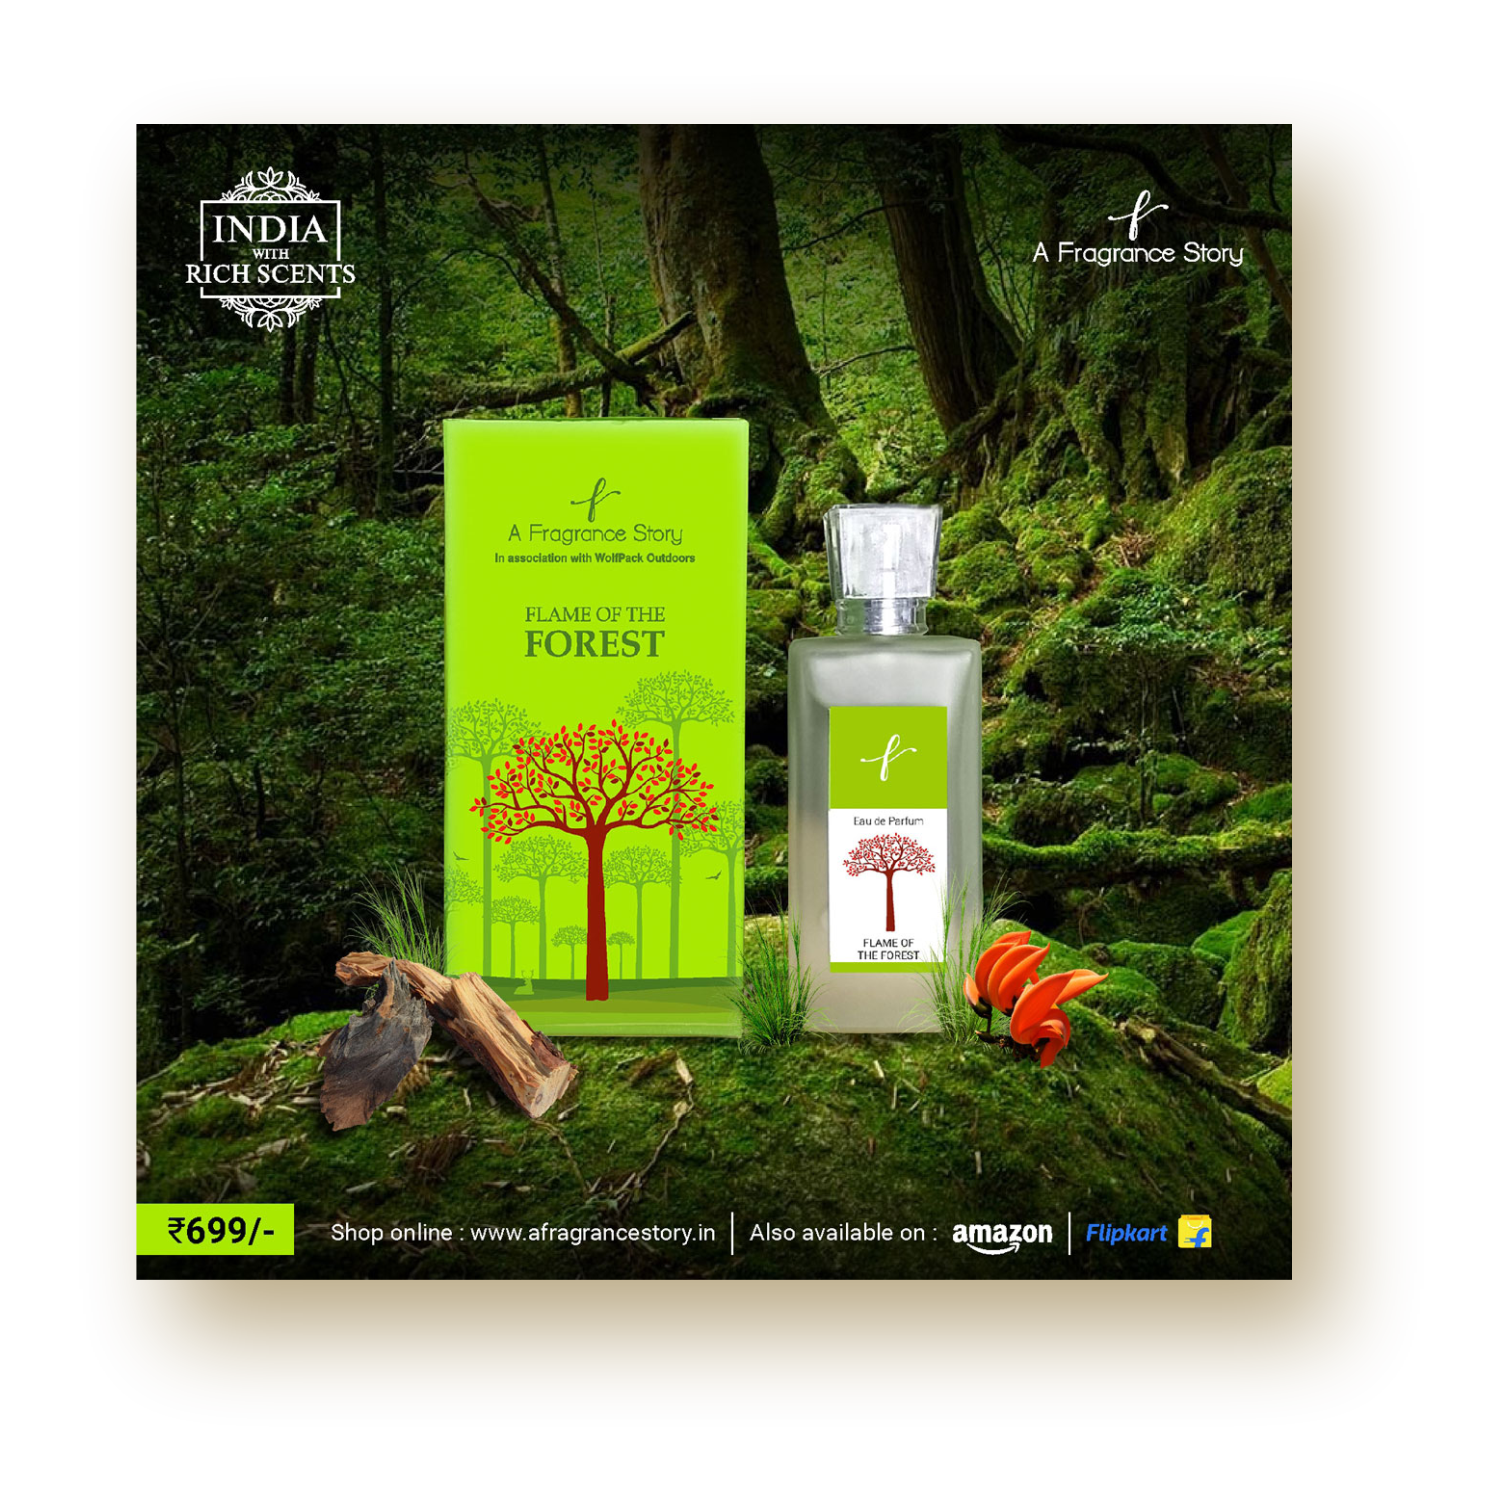 A Fragrance Story flame of the forest bottle Social media posts